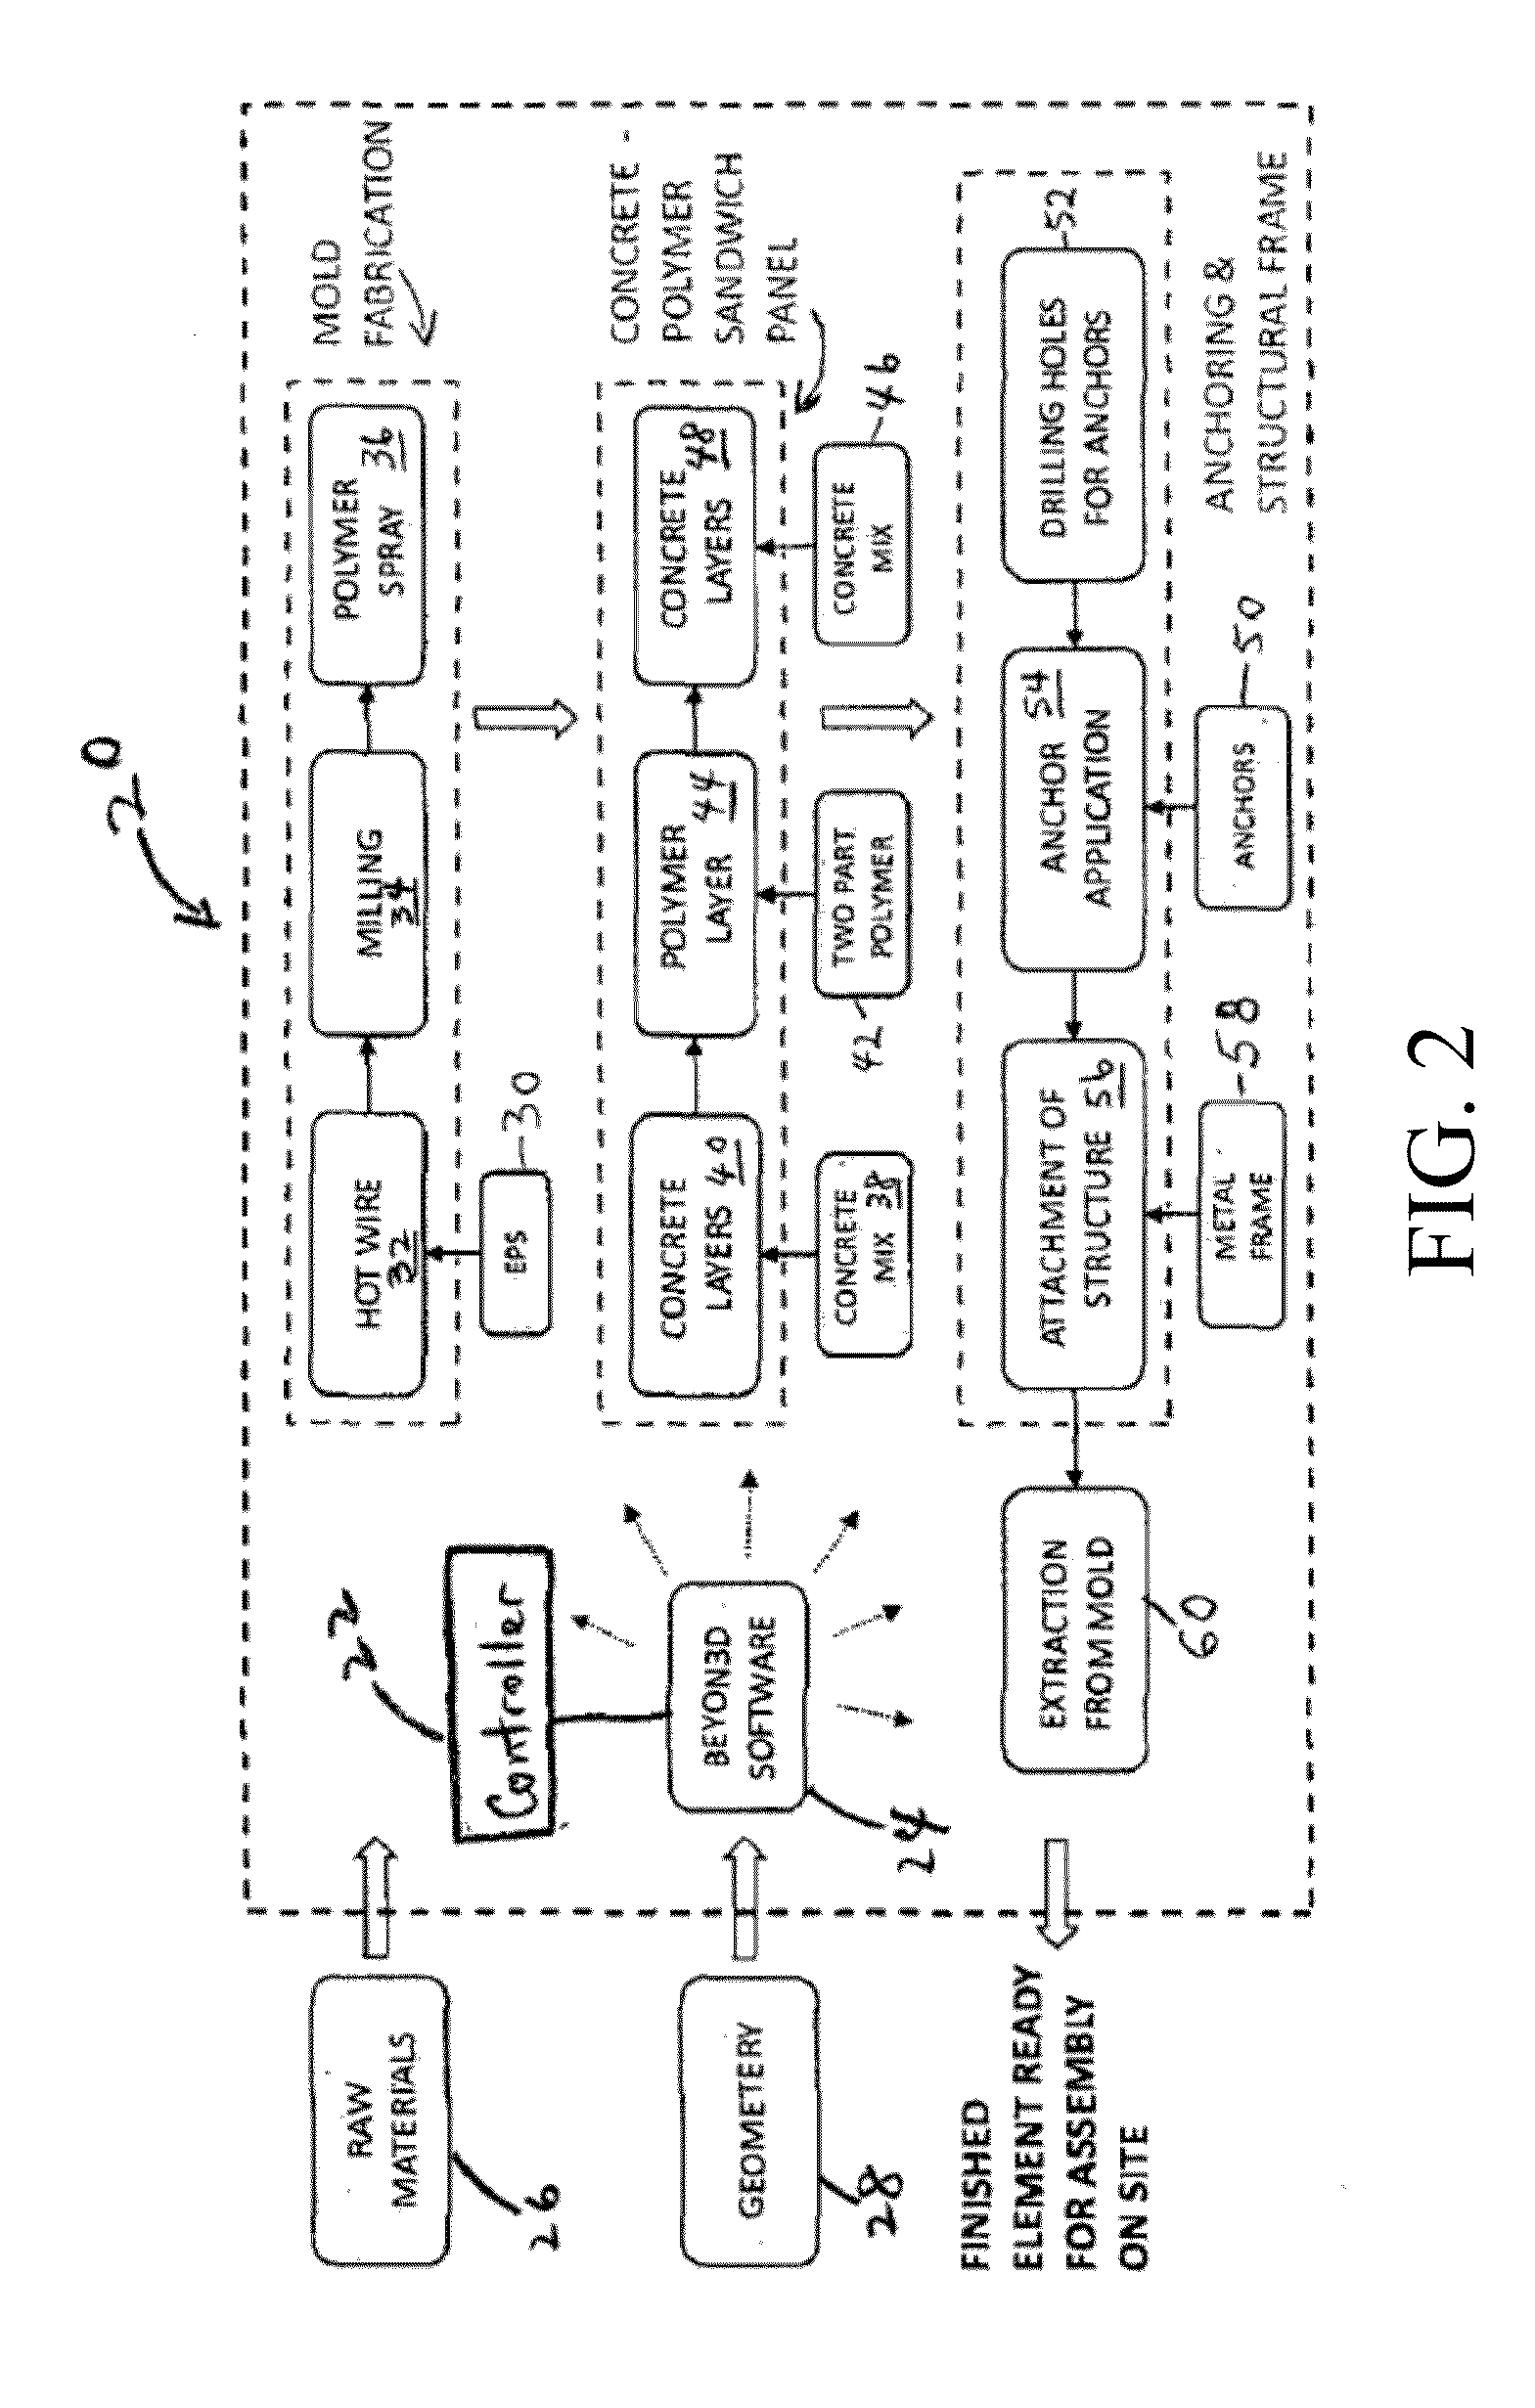 Method and system for fabrication of custom made molds and concrete architectural components